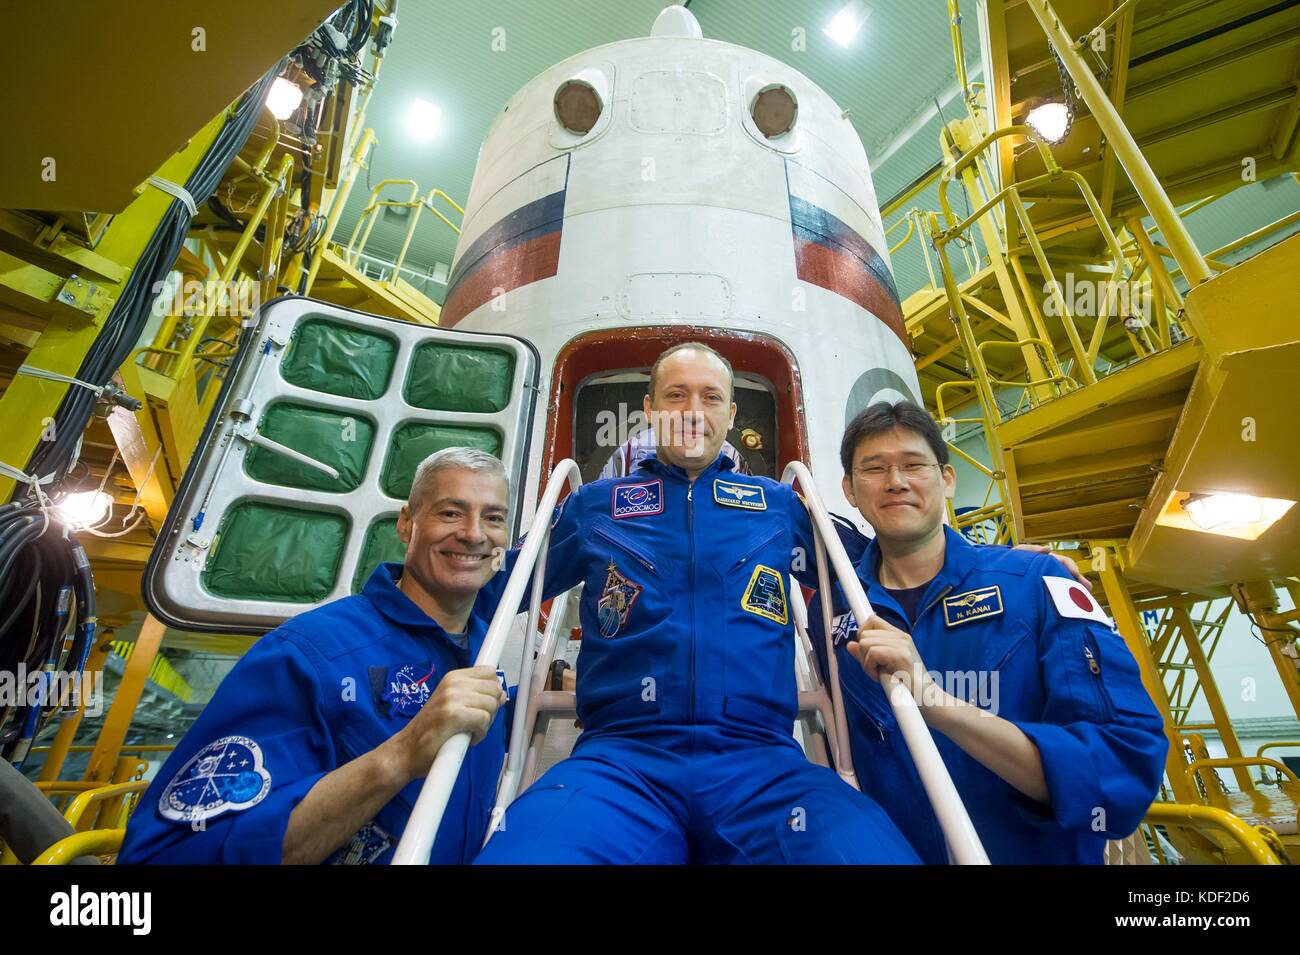 NASA International Space Station Expedition 52 backup crew members (L-R) American astronaut Mark Vande Hei, Russian cosmonaut Alexander Misurkin of Roscosmos, and Japanese astronaut Norishige Kanai of the Japanese Aerospace Exploration Agency pose in front of the Soyuz MS-05 spacecraft during their final pre-launch fit check dress rehearsal at the Baikonur Cosmodrome Integration Facility July 24, 2017 in Baikonur, Kazakhstan.   (photo by Andrey Shelepin  via Planetpix) Stock Photo